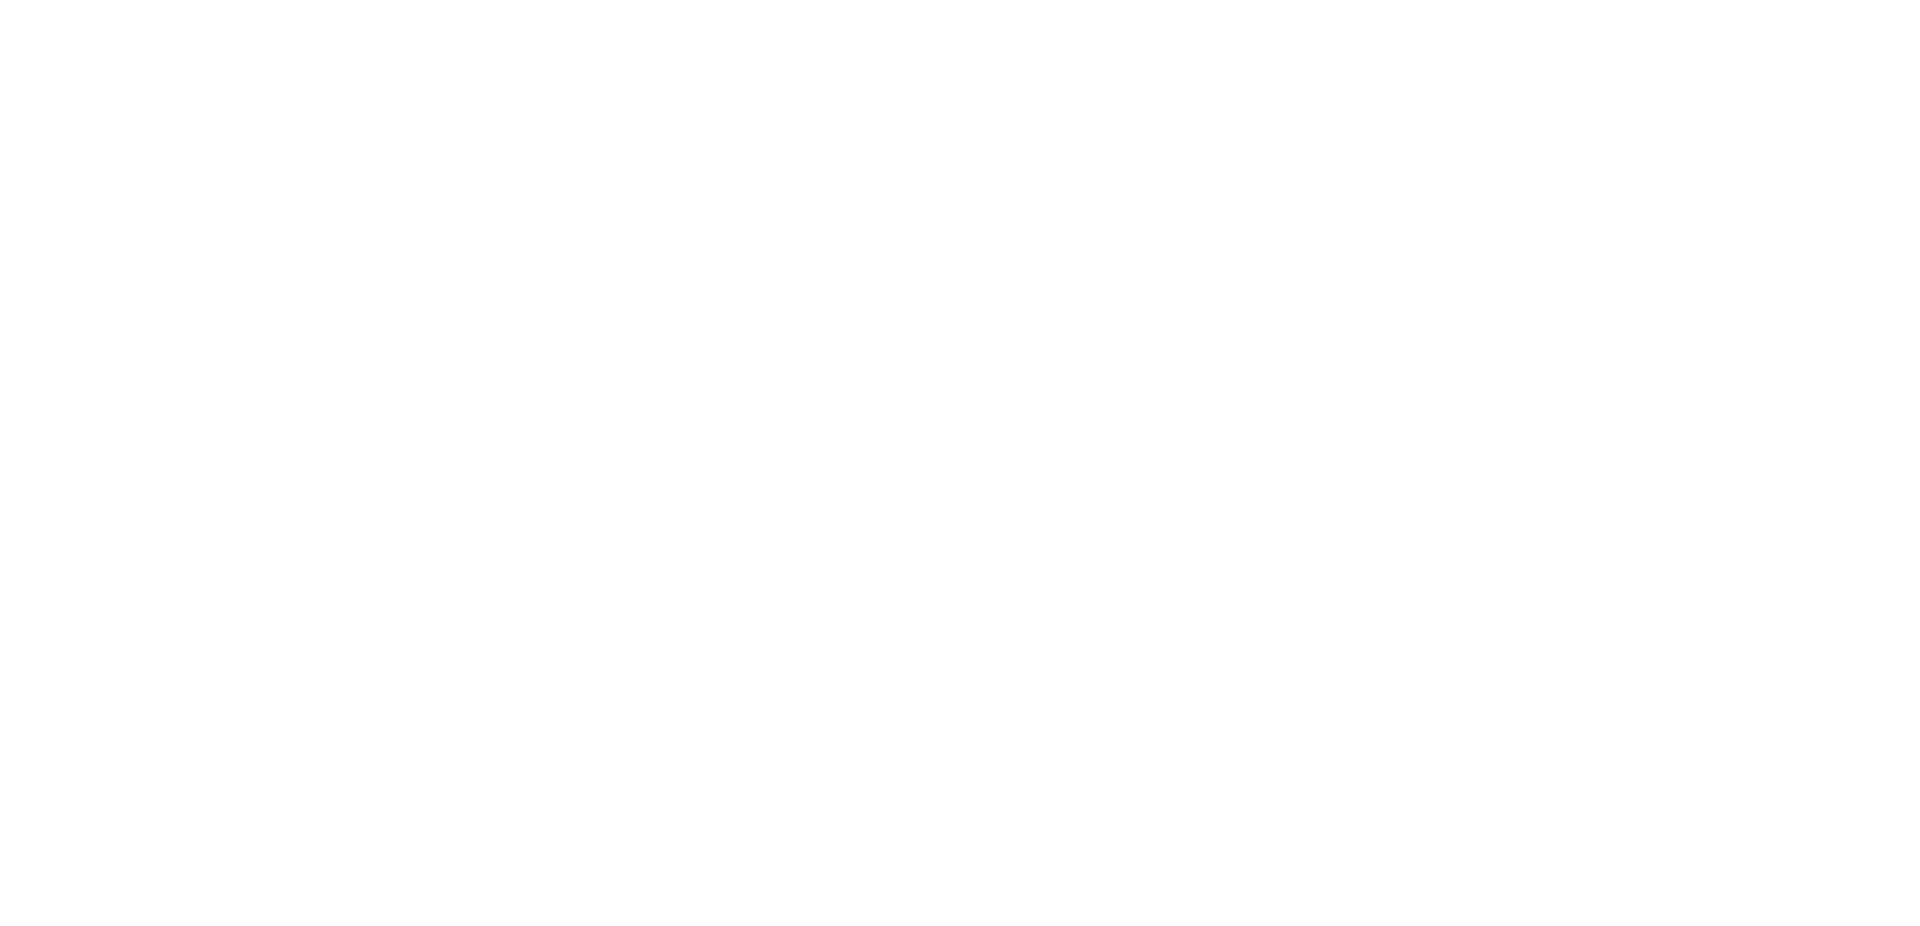 A Touch of Recovery logo in white